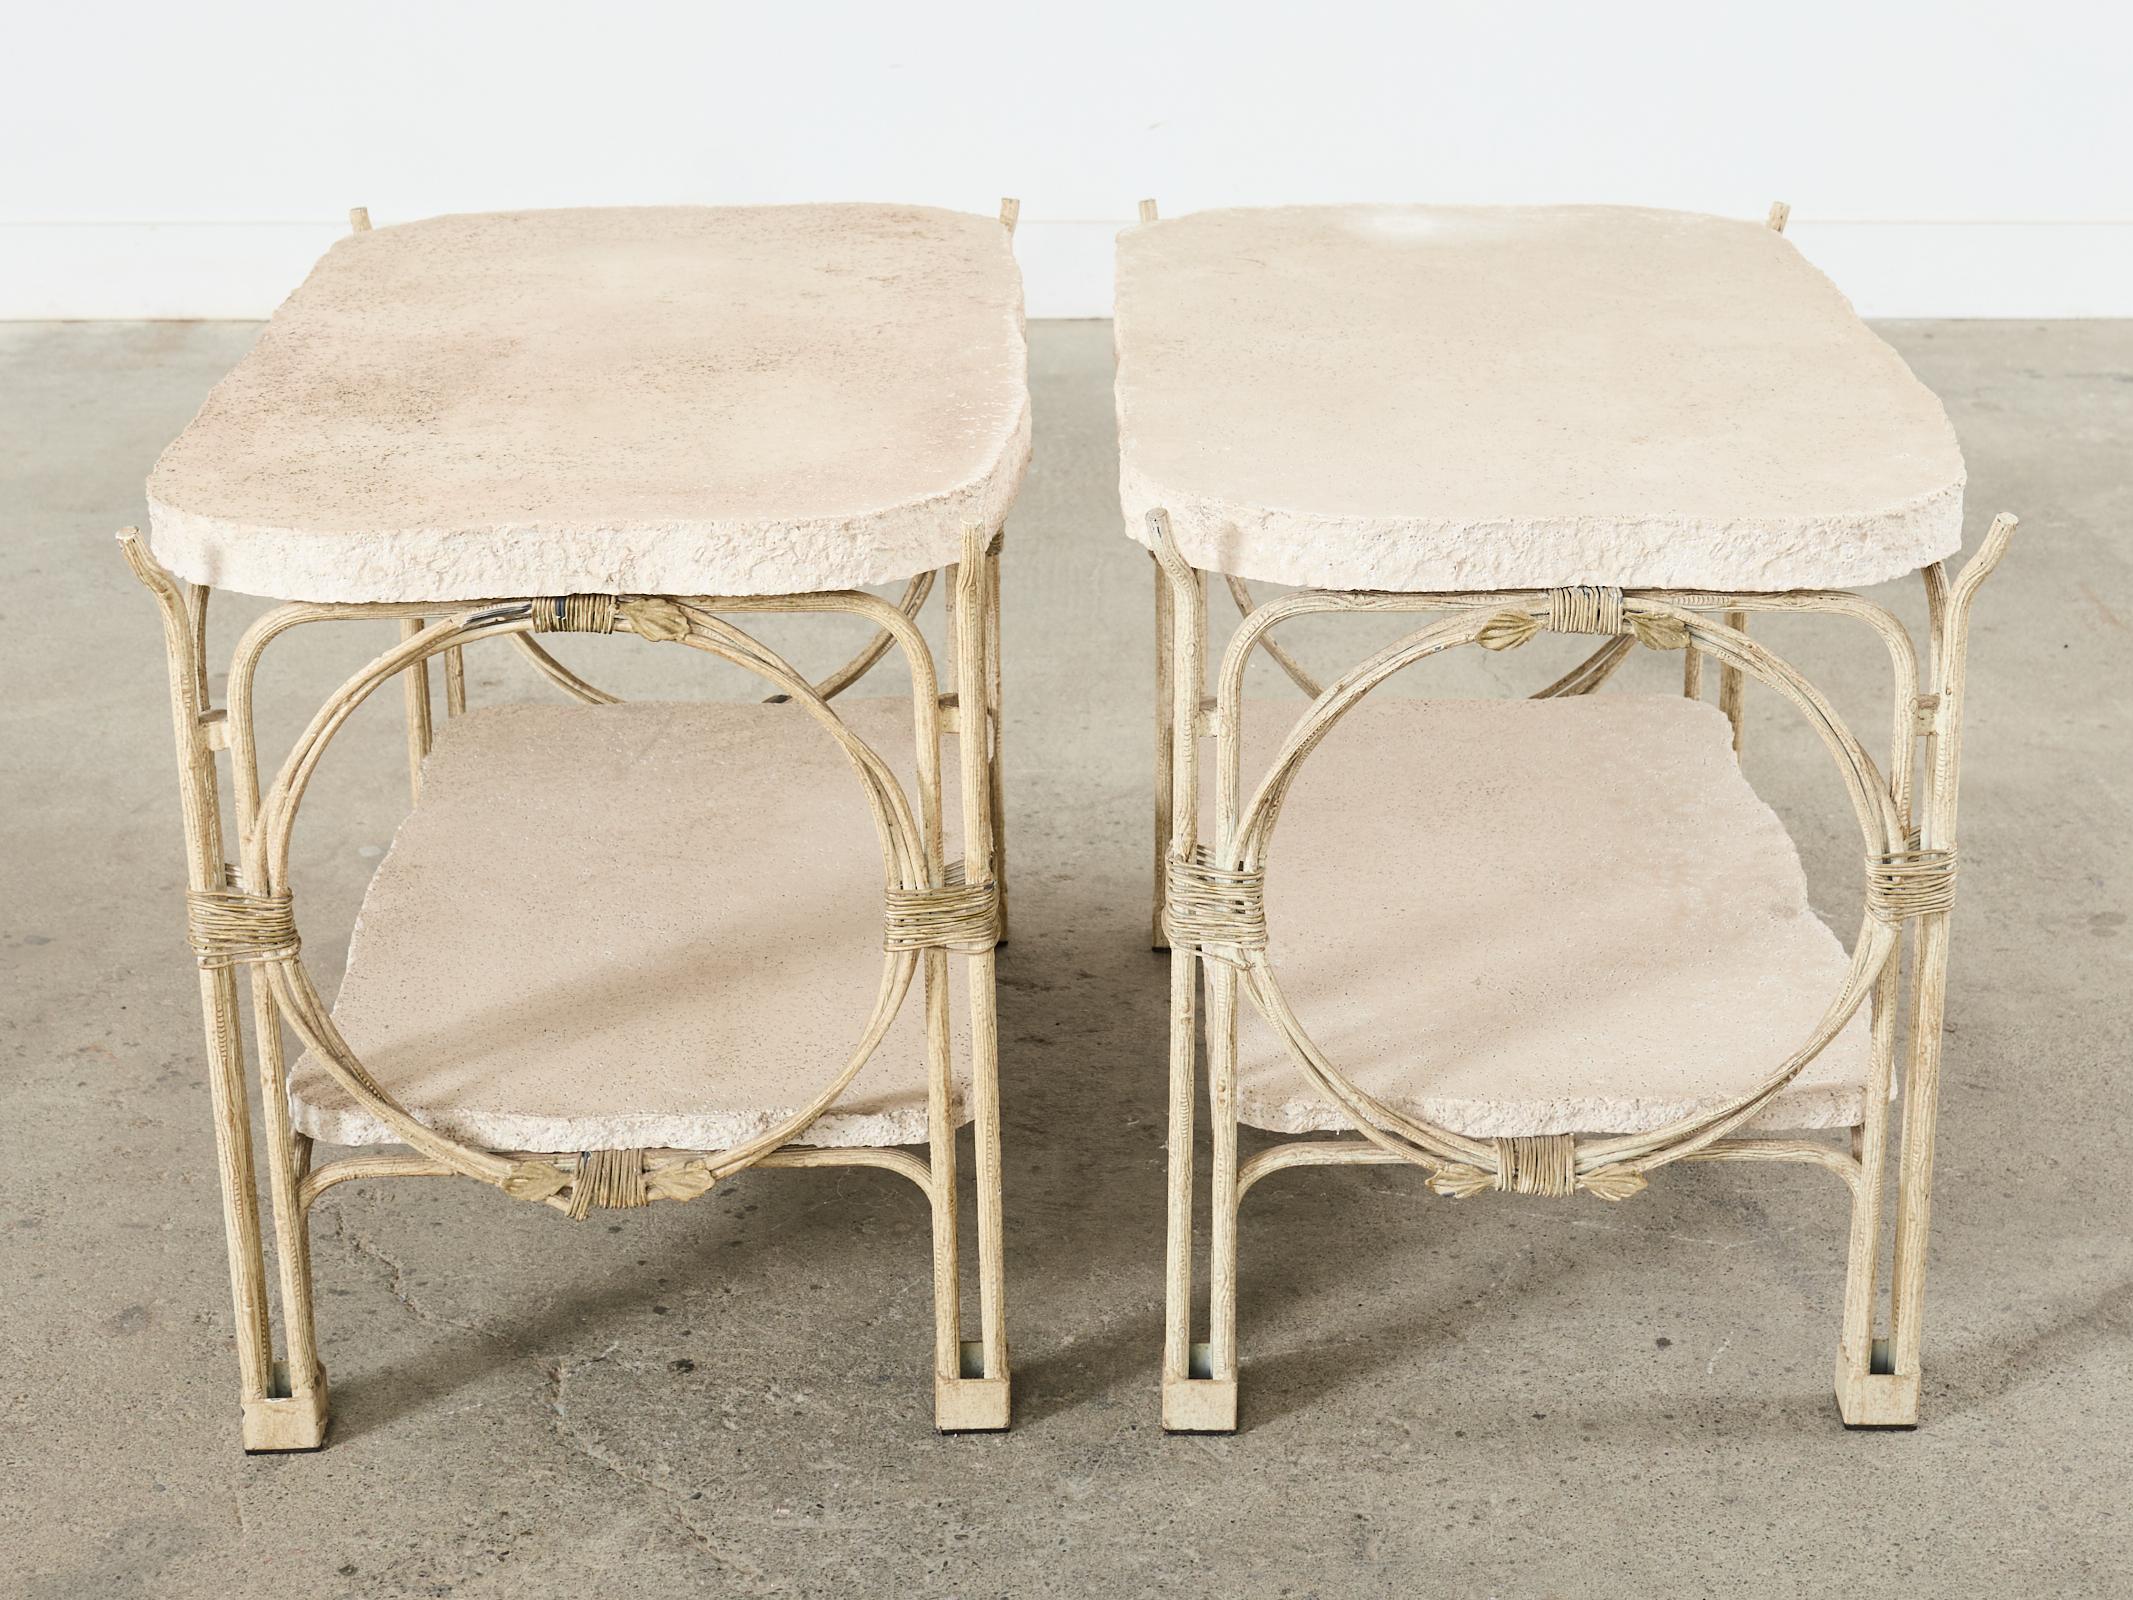 Pair of Rose Tarlow Style Iron Twig Stone Garden Tables In Good Condition For Sale In Rio Vista, CA